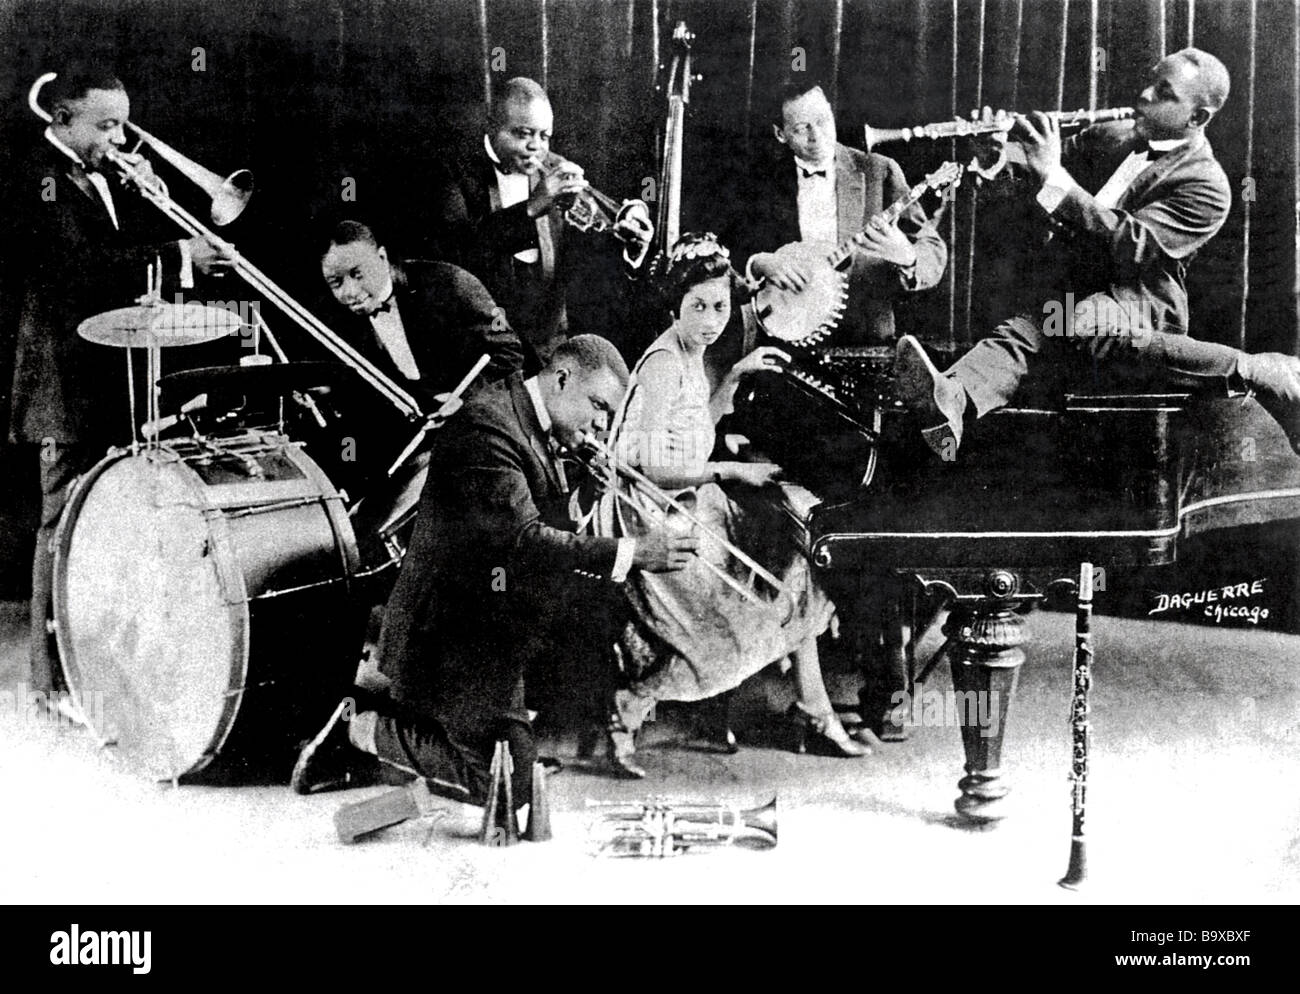 KING OLIVER'S CREOLE JAZZ BAND in 1922 - see Description below for details Stock Photo